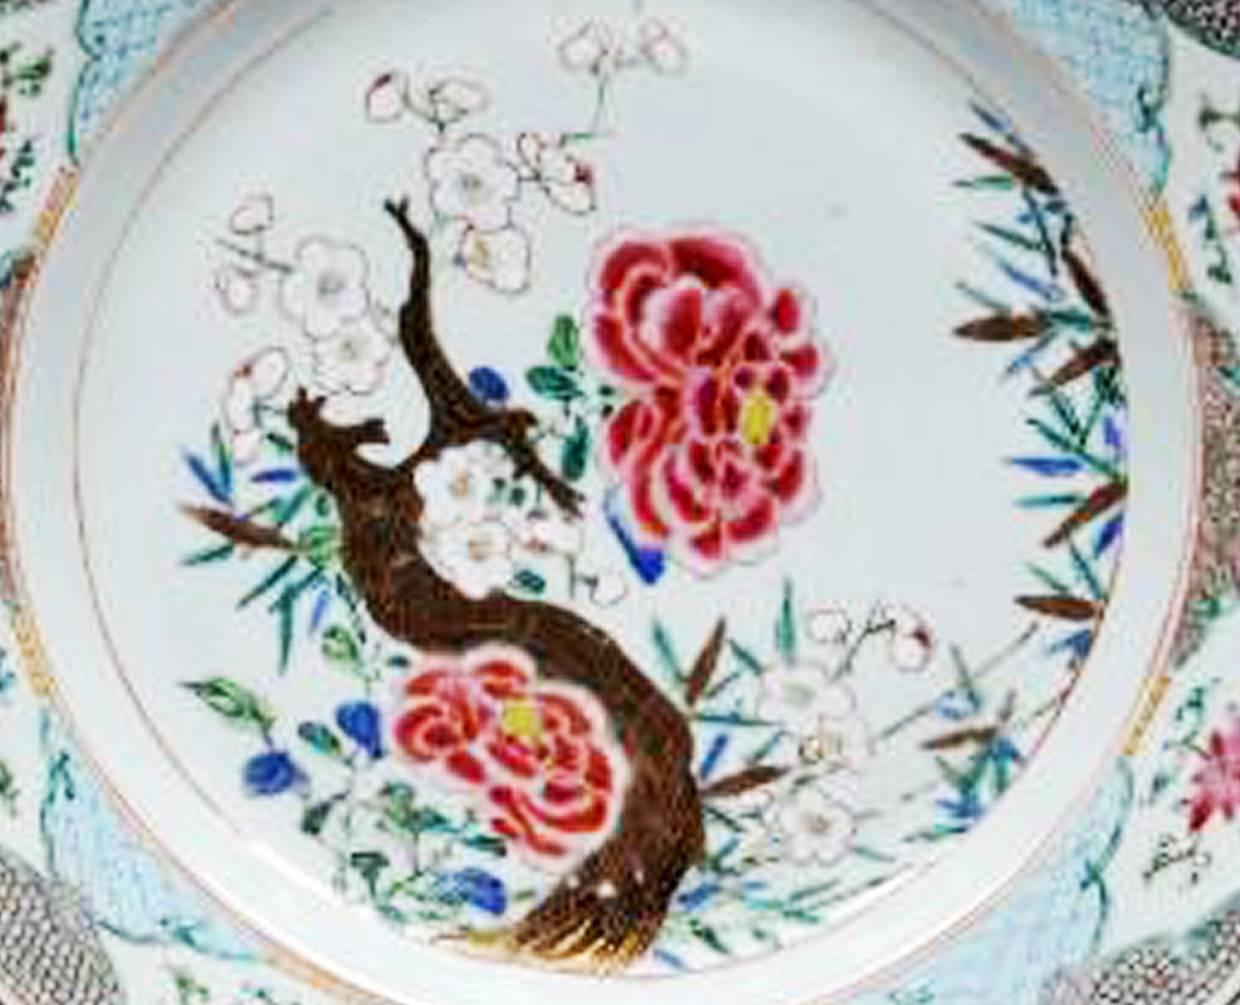 Chinese Export famille rose porcelain dishes, 
circa 1765-1775.

The pair of Chinese Export famille rose large dishes are finely painted with a flowering branch design with two large red flowers and a branch with blooming small white flowers. The